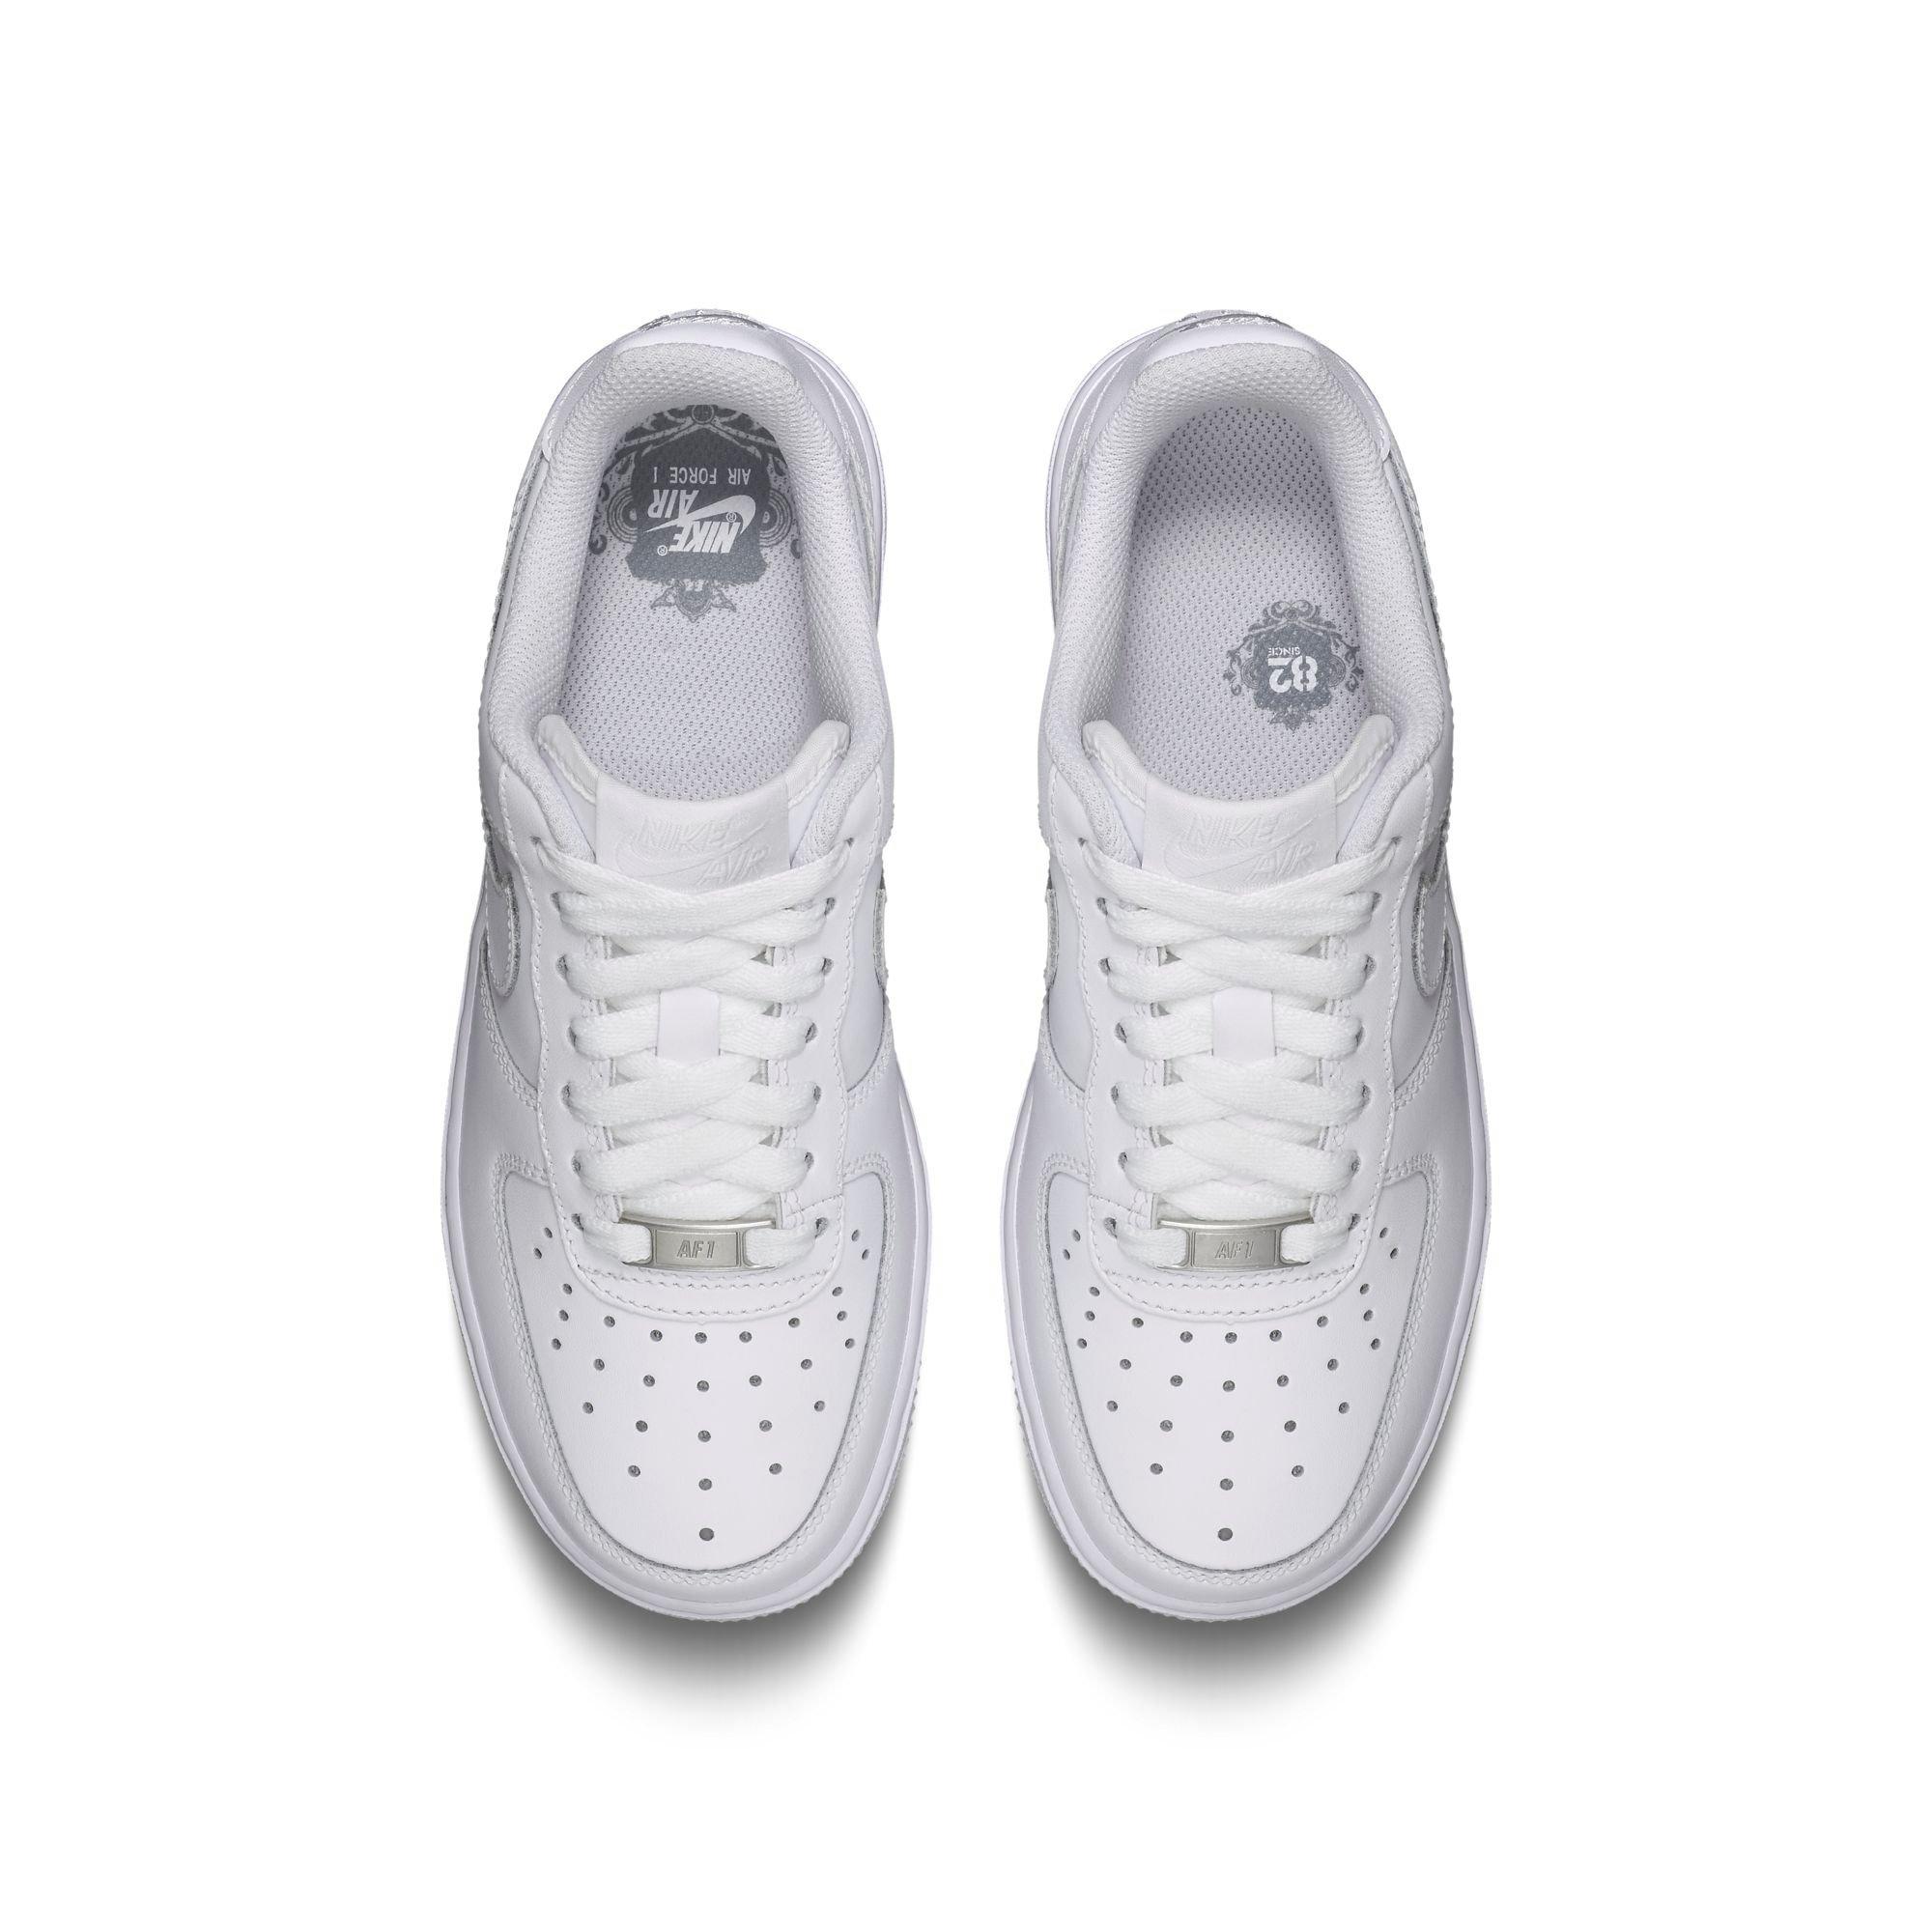 white air force 1 grade school size 7